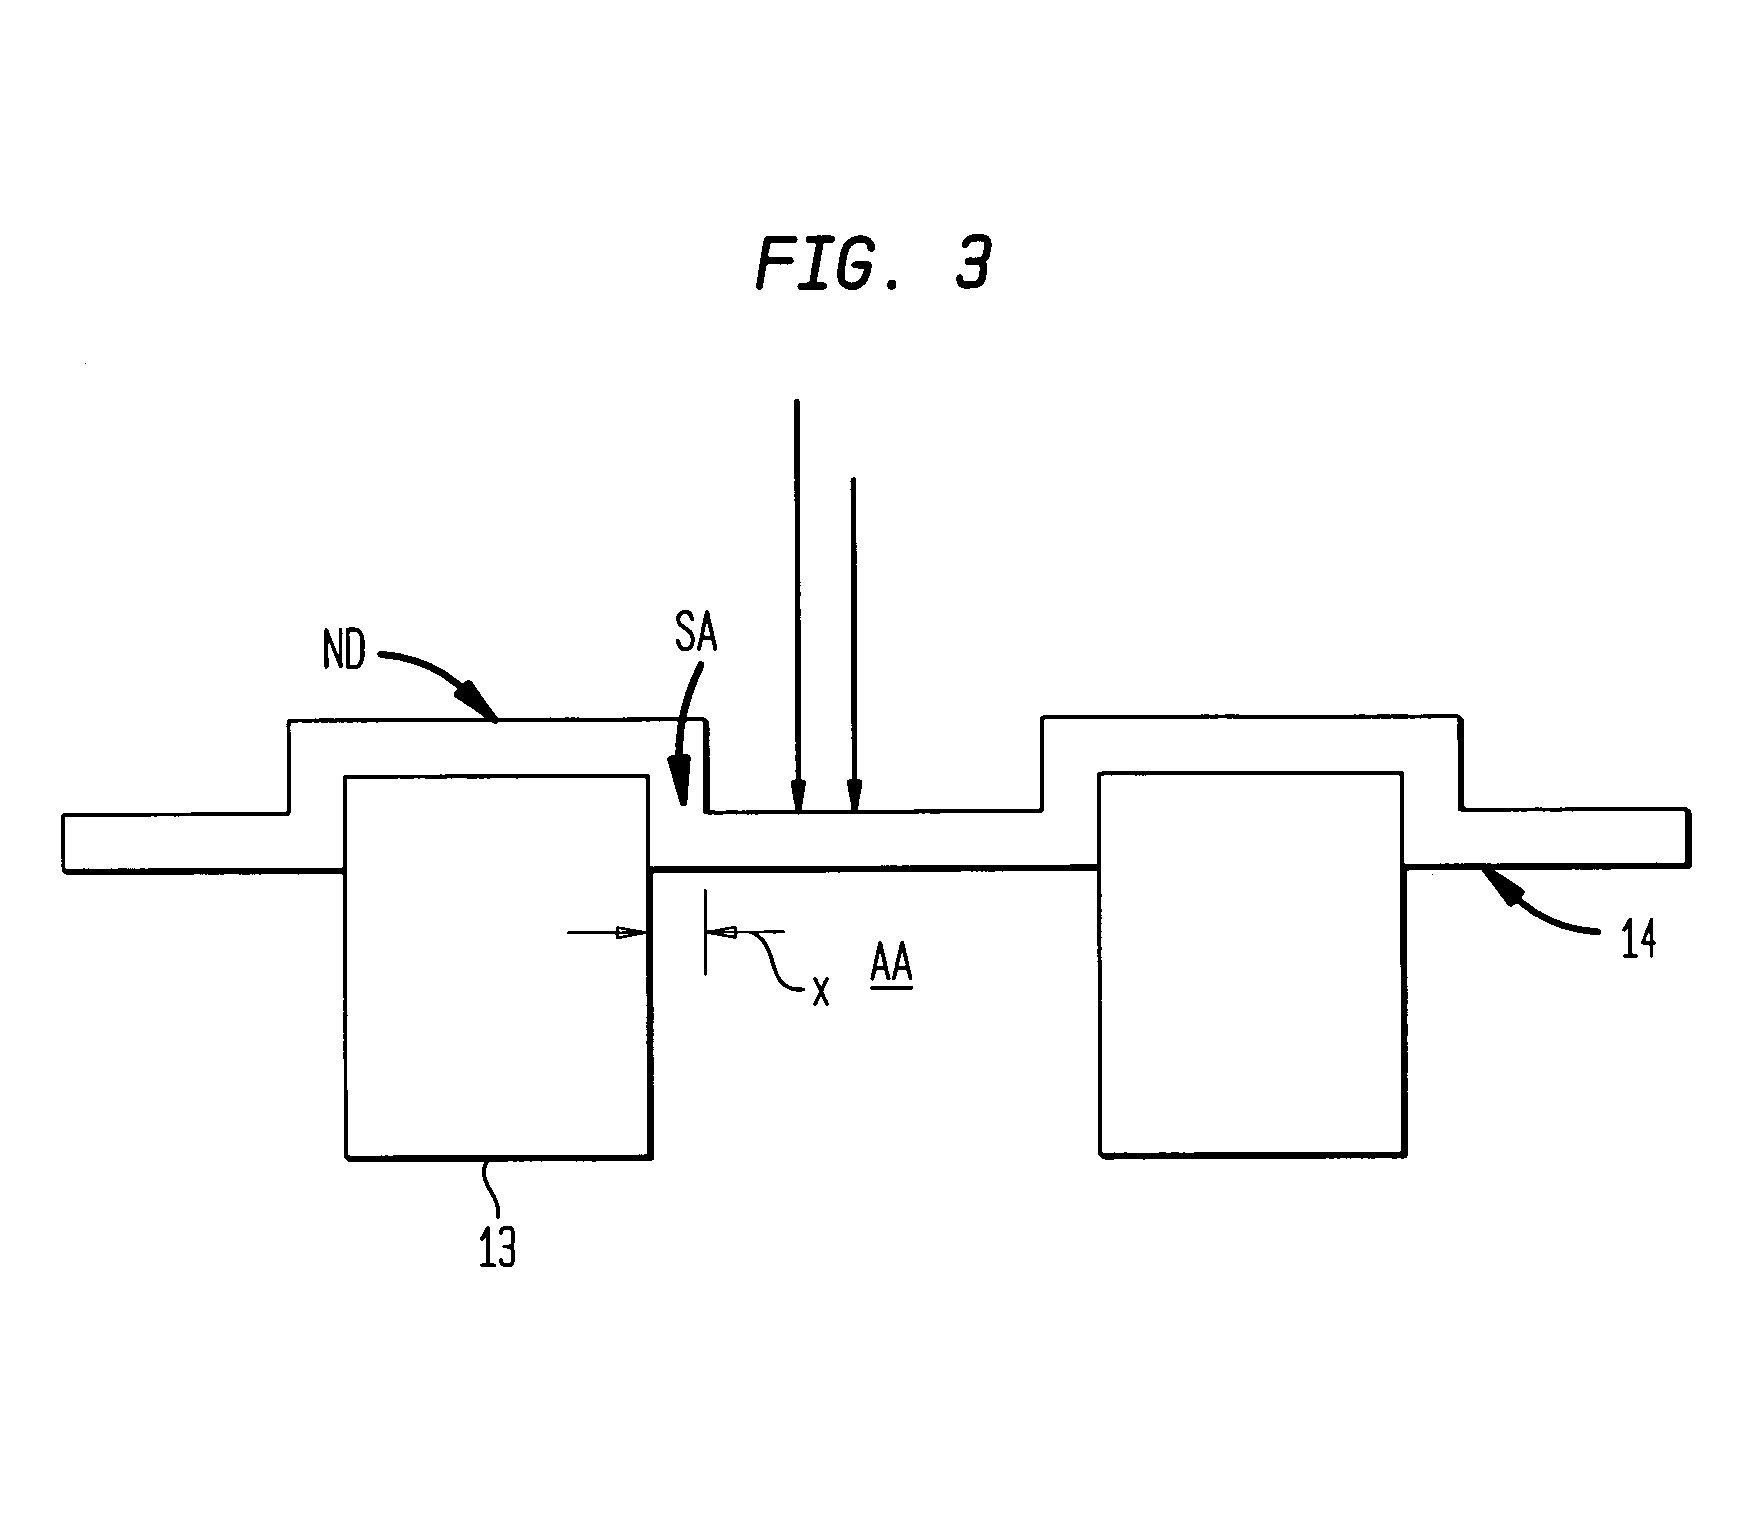 Nitrogen implantation using a shadow effect to control gate oxide thickness in DRAM semiconductor